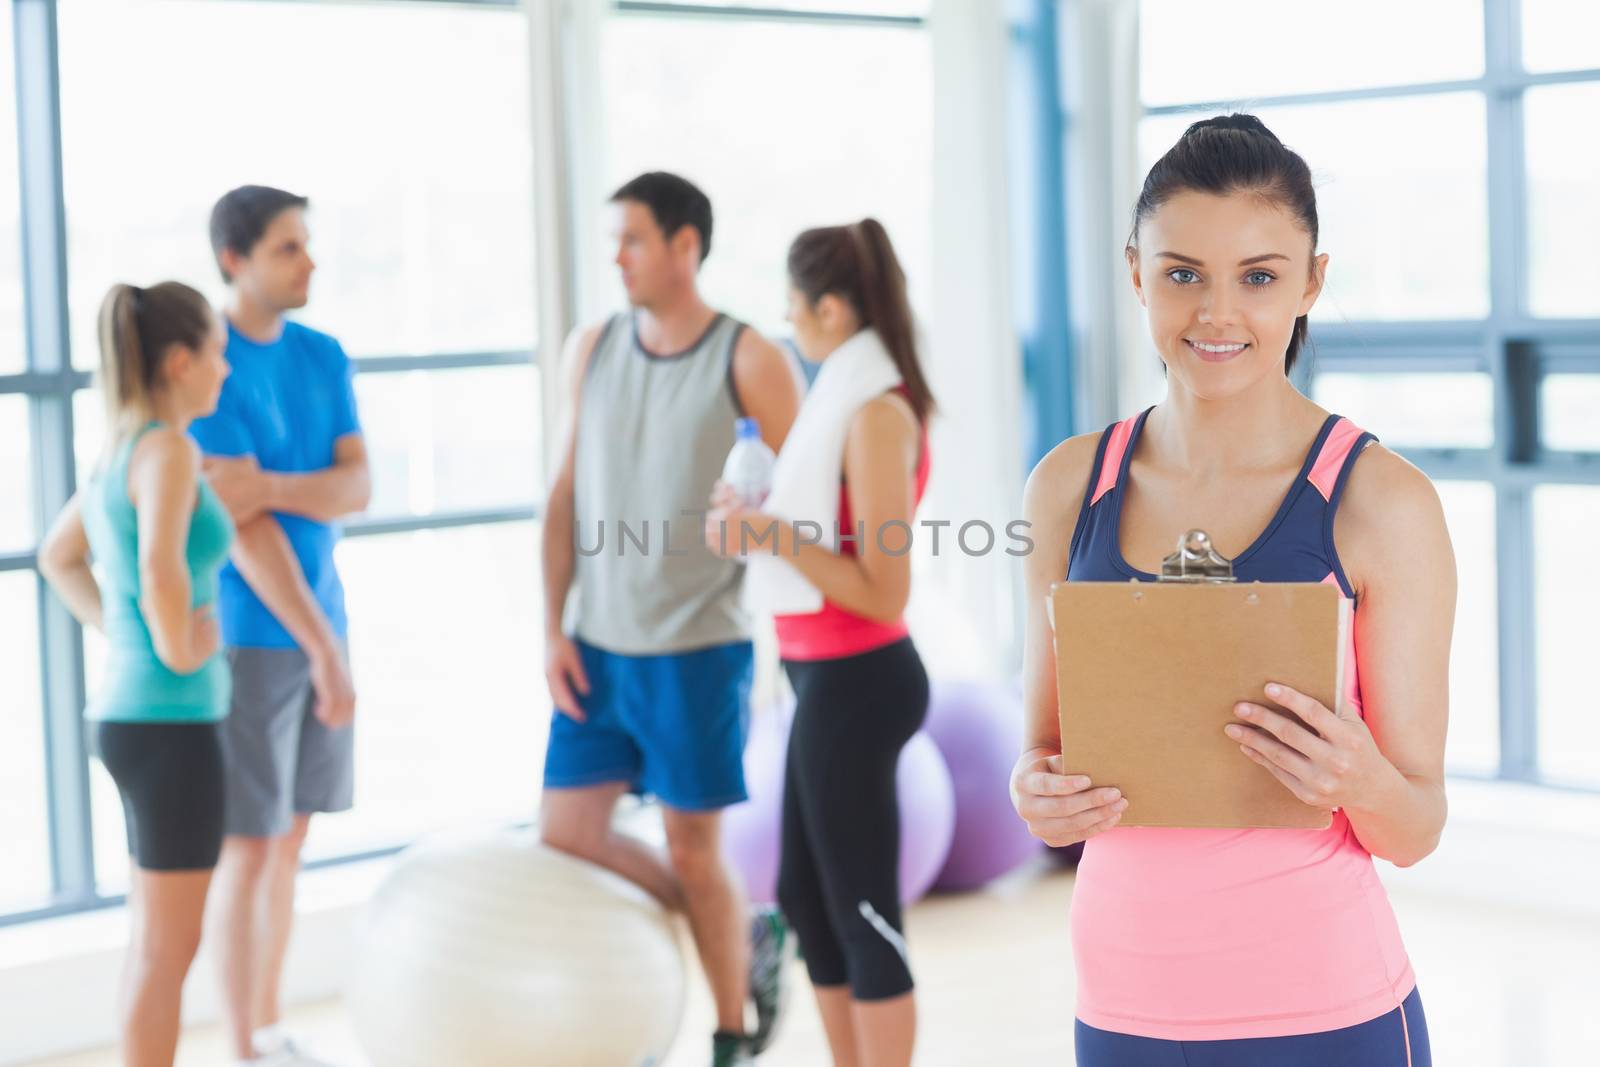 Portrait of an instructor with fitness class in background in fitness studio